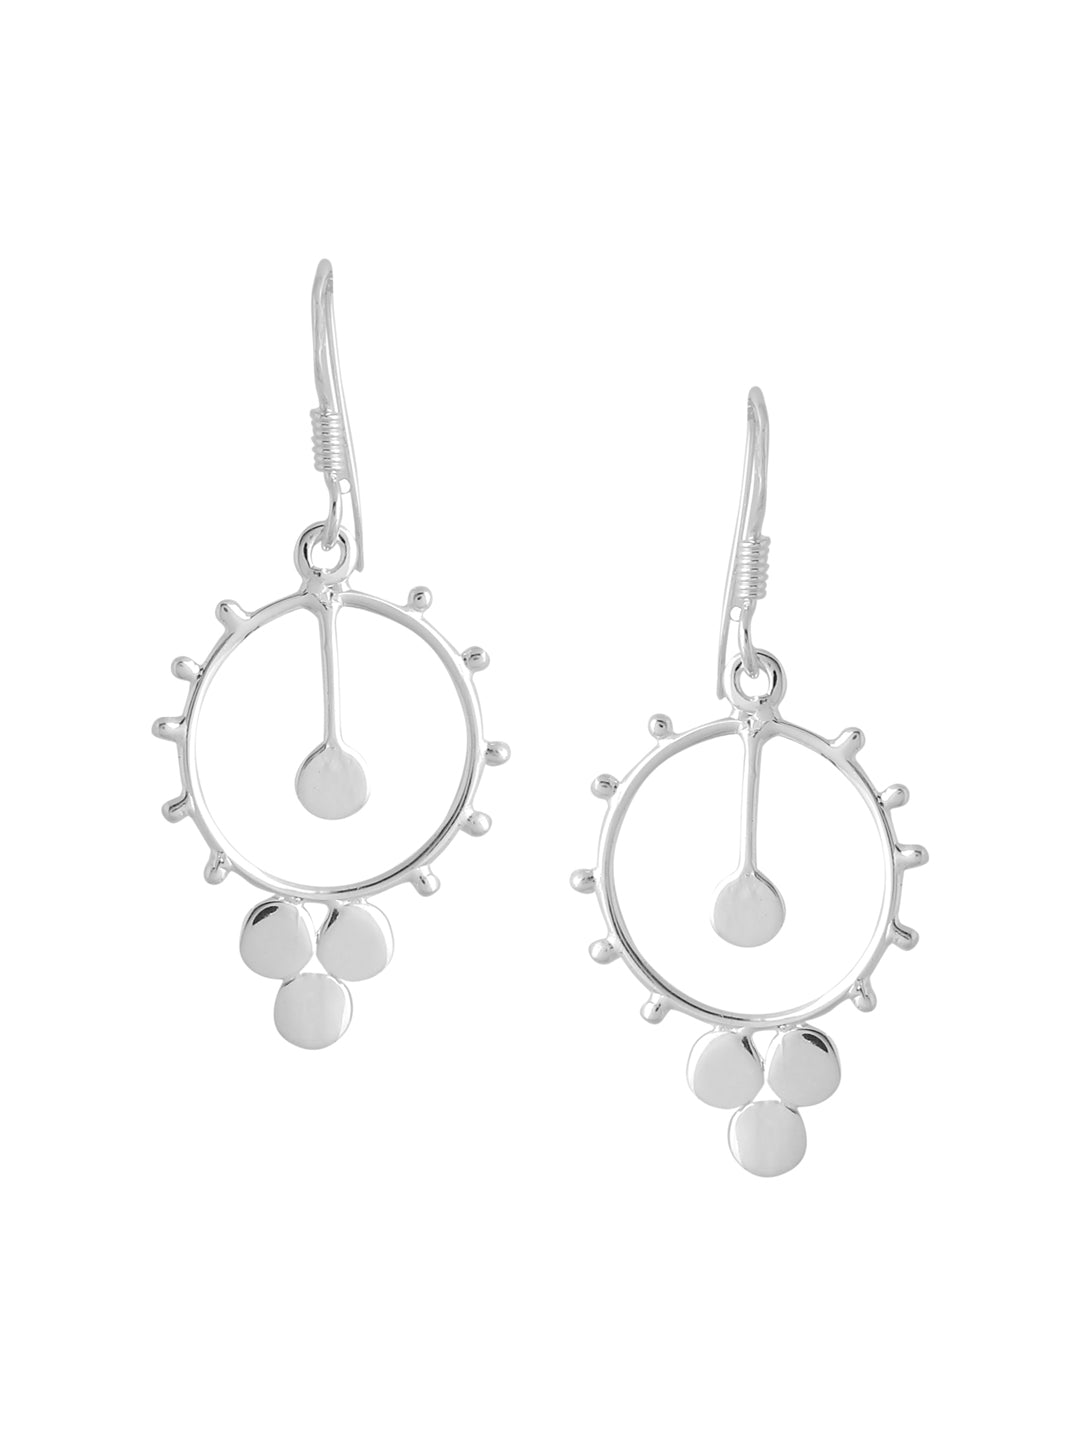 Radiant Fusion: Two Round Three Metal Earring